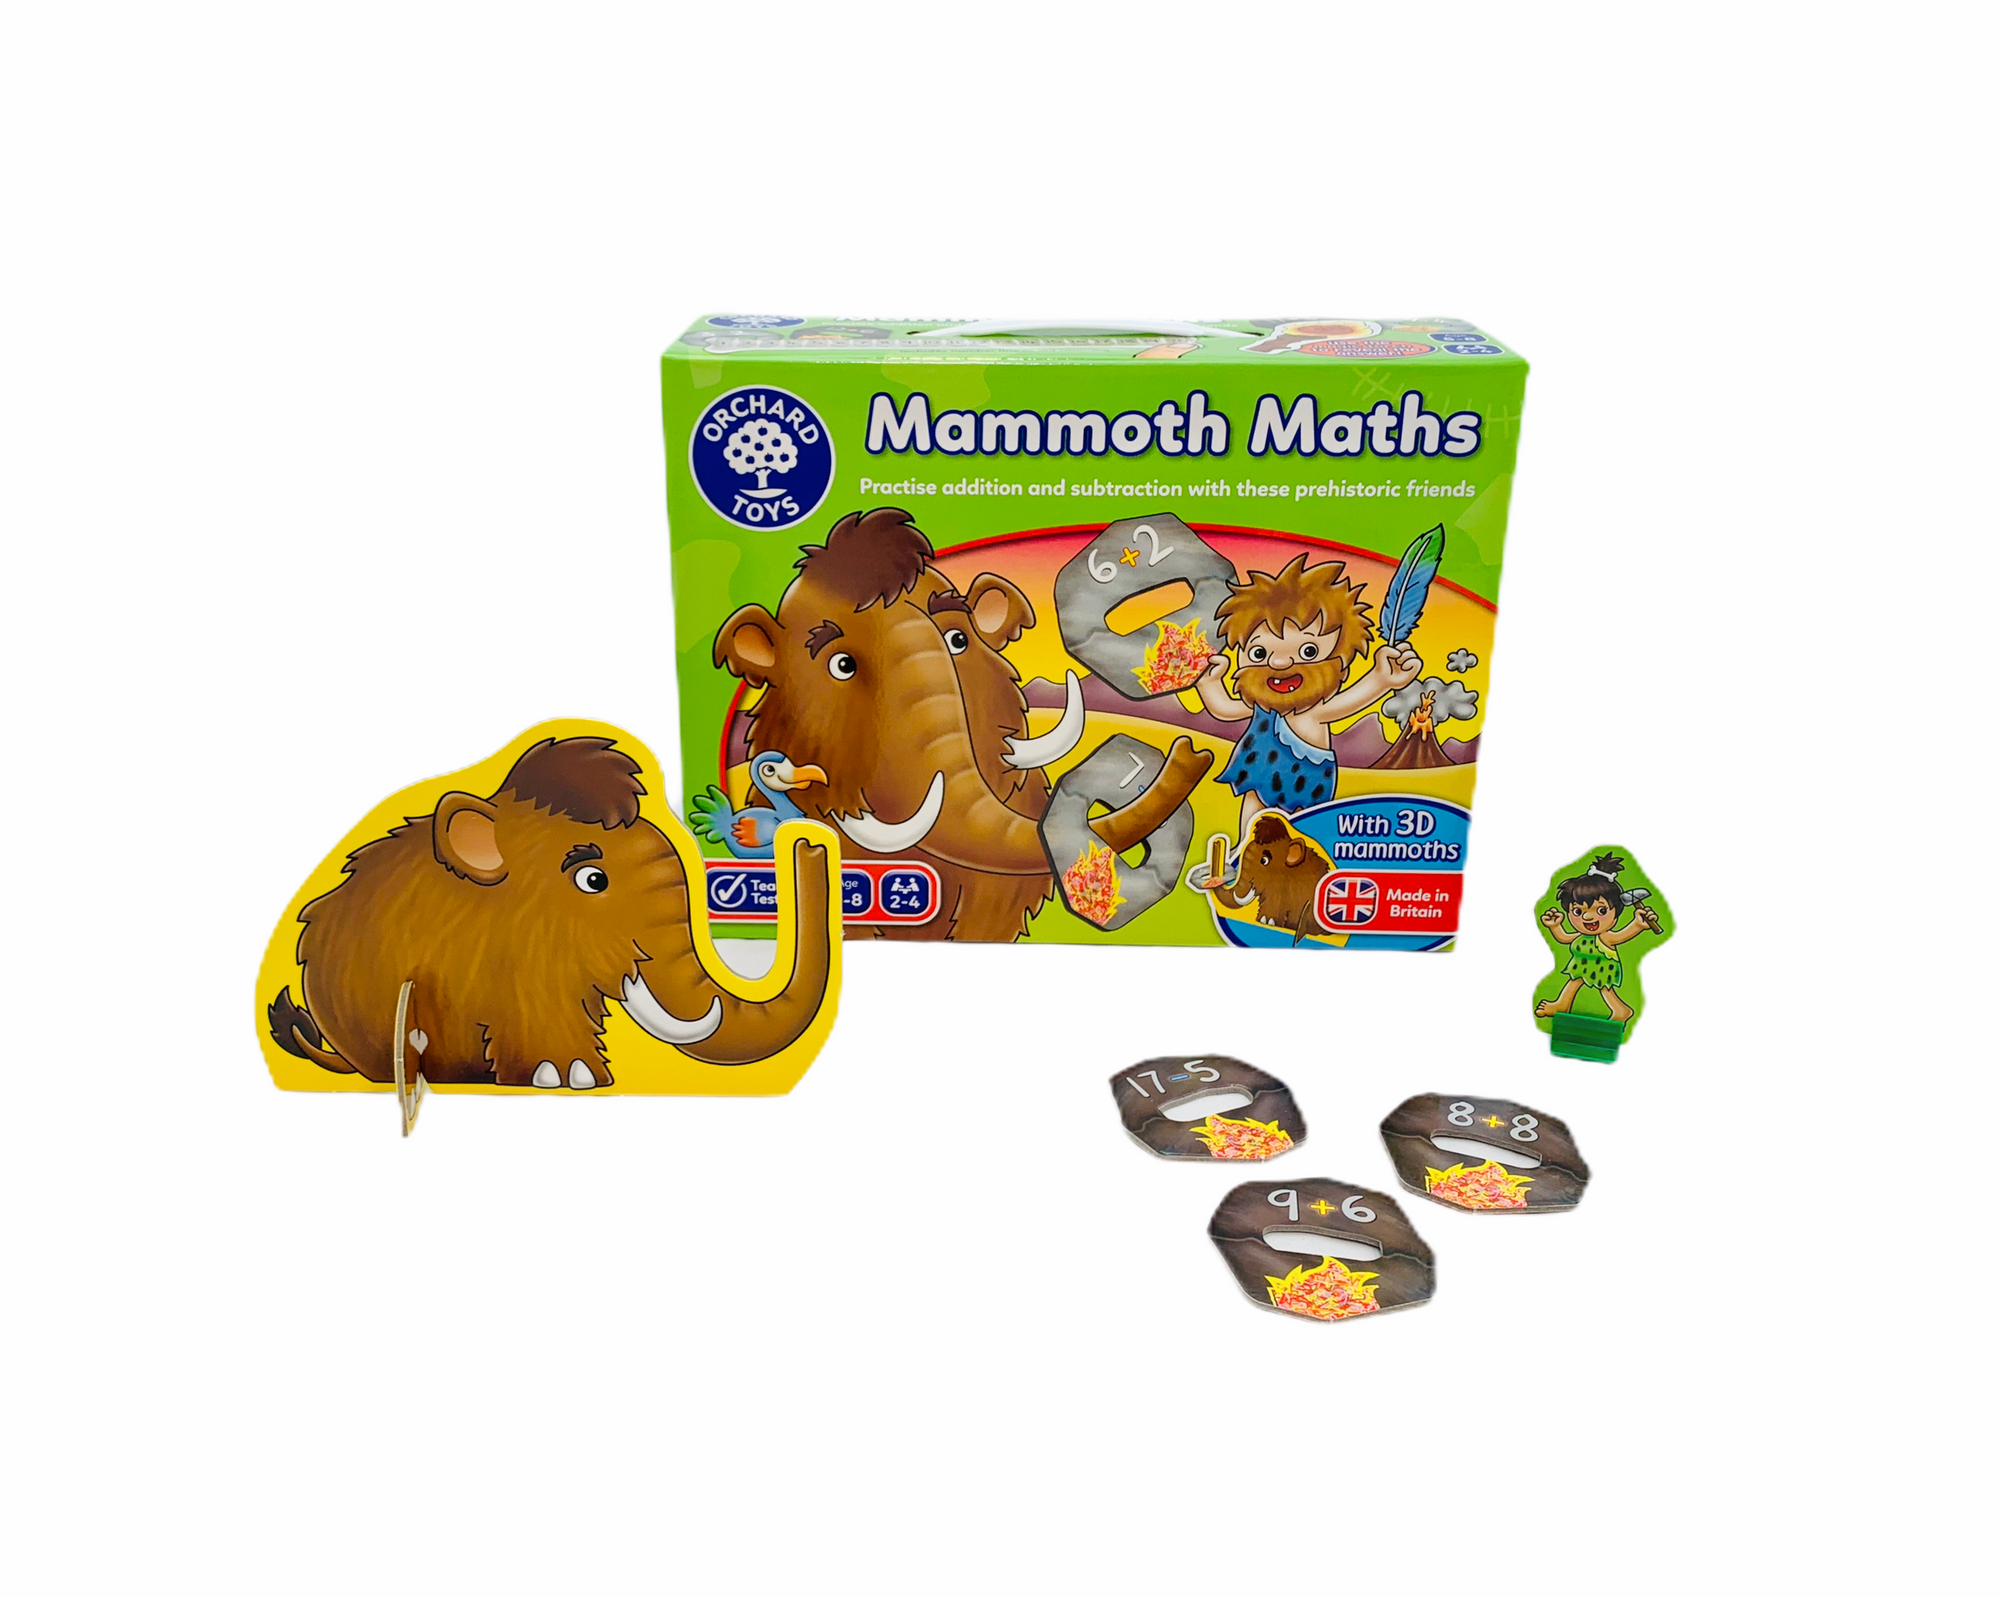 Orchard Mammoth Maths game with pieces in front of box